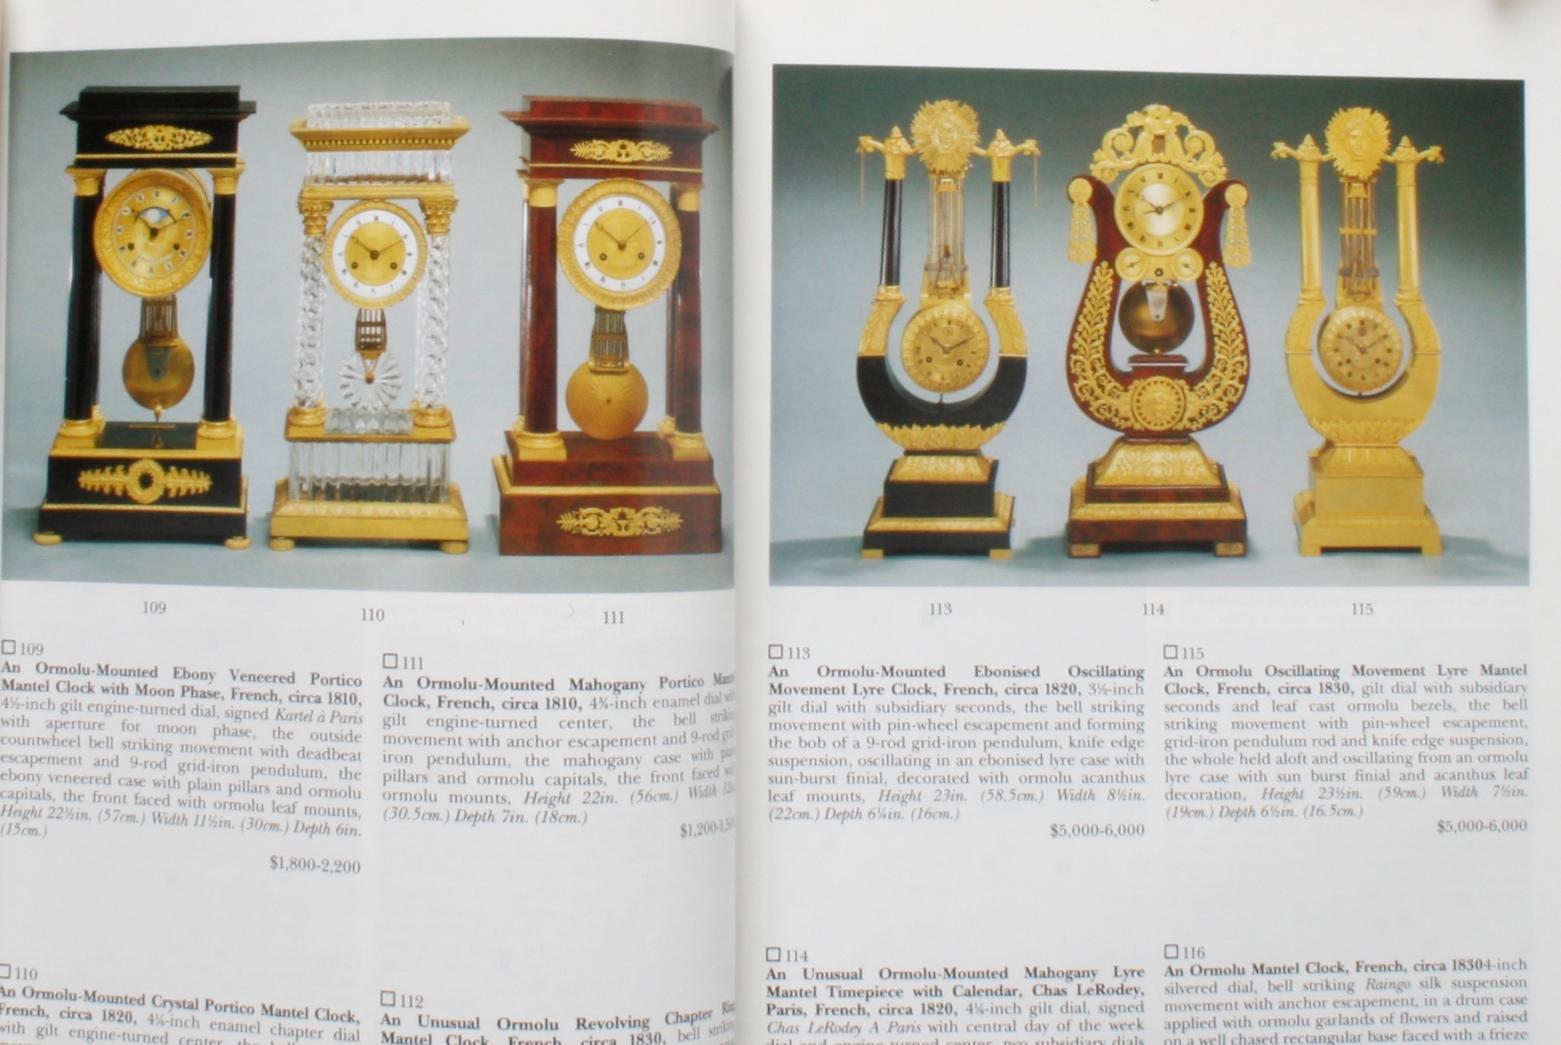 American Sotheby's: The Joseph M. Meraux Collection of Rare and Unusual Clocks, 6/1993 For Sale